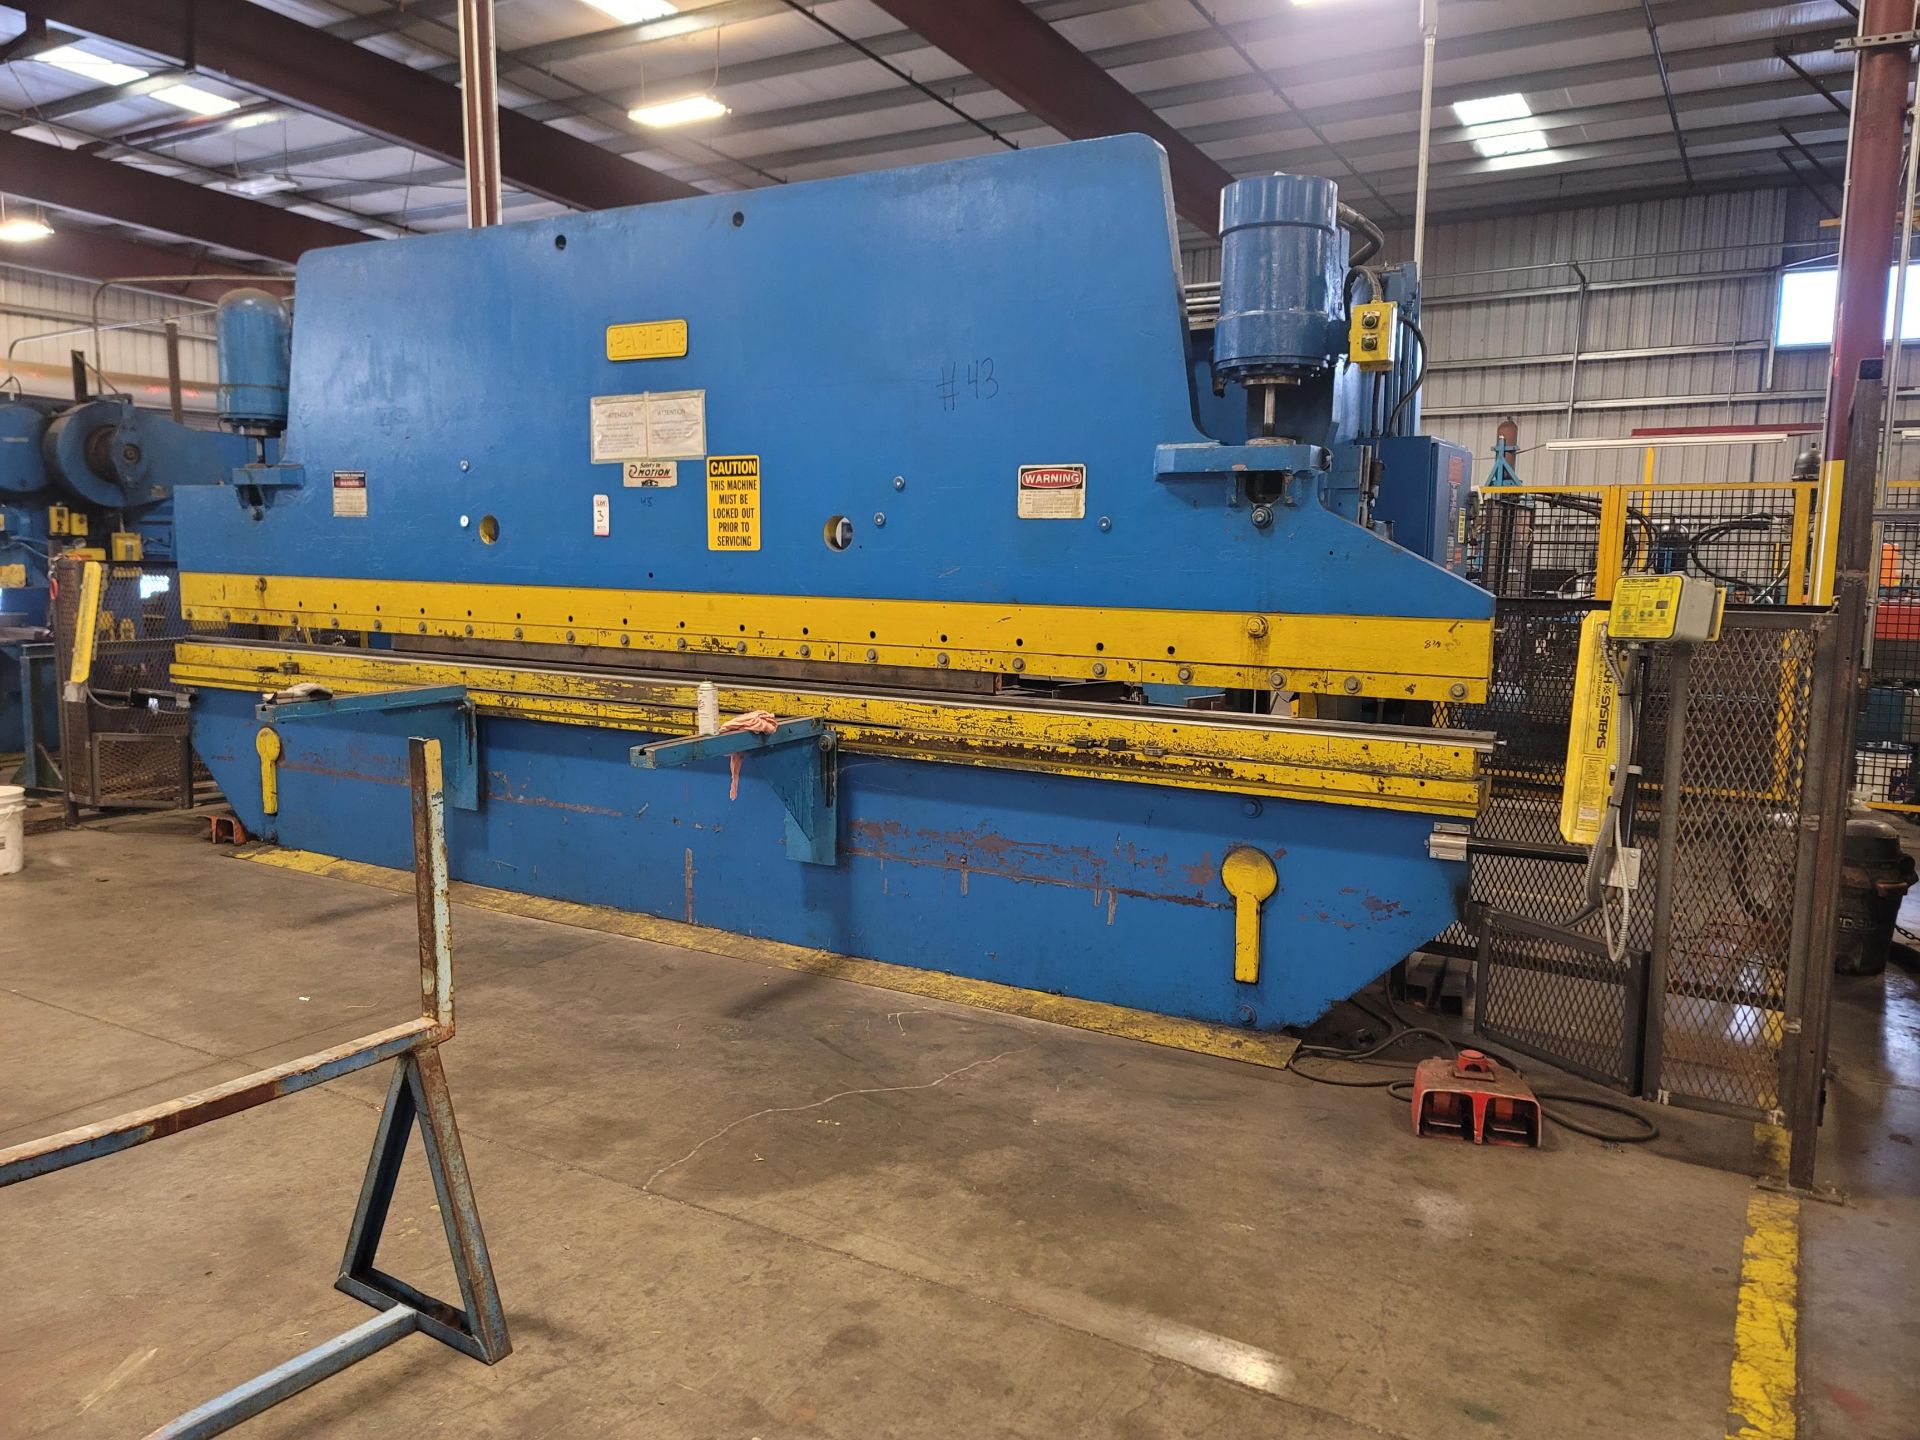 PACIFIC K175-21 PRESS BRAKE, 3/16" X 21', HYDRAULIC, PROTECH EAGLE EYE GUARDING SYSTEM, S/N 8902 - Image 3 of 12